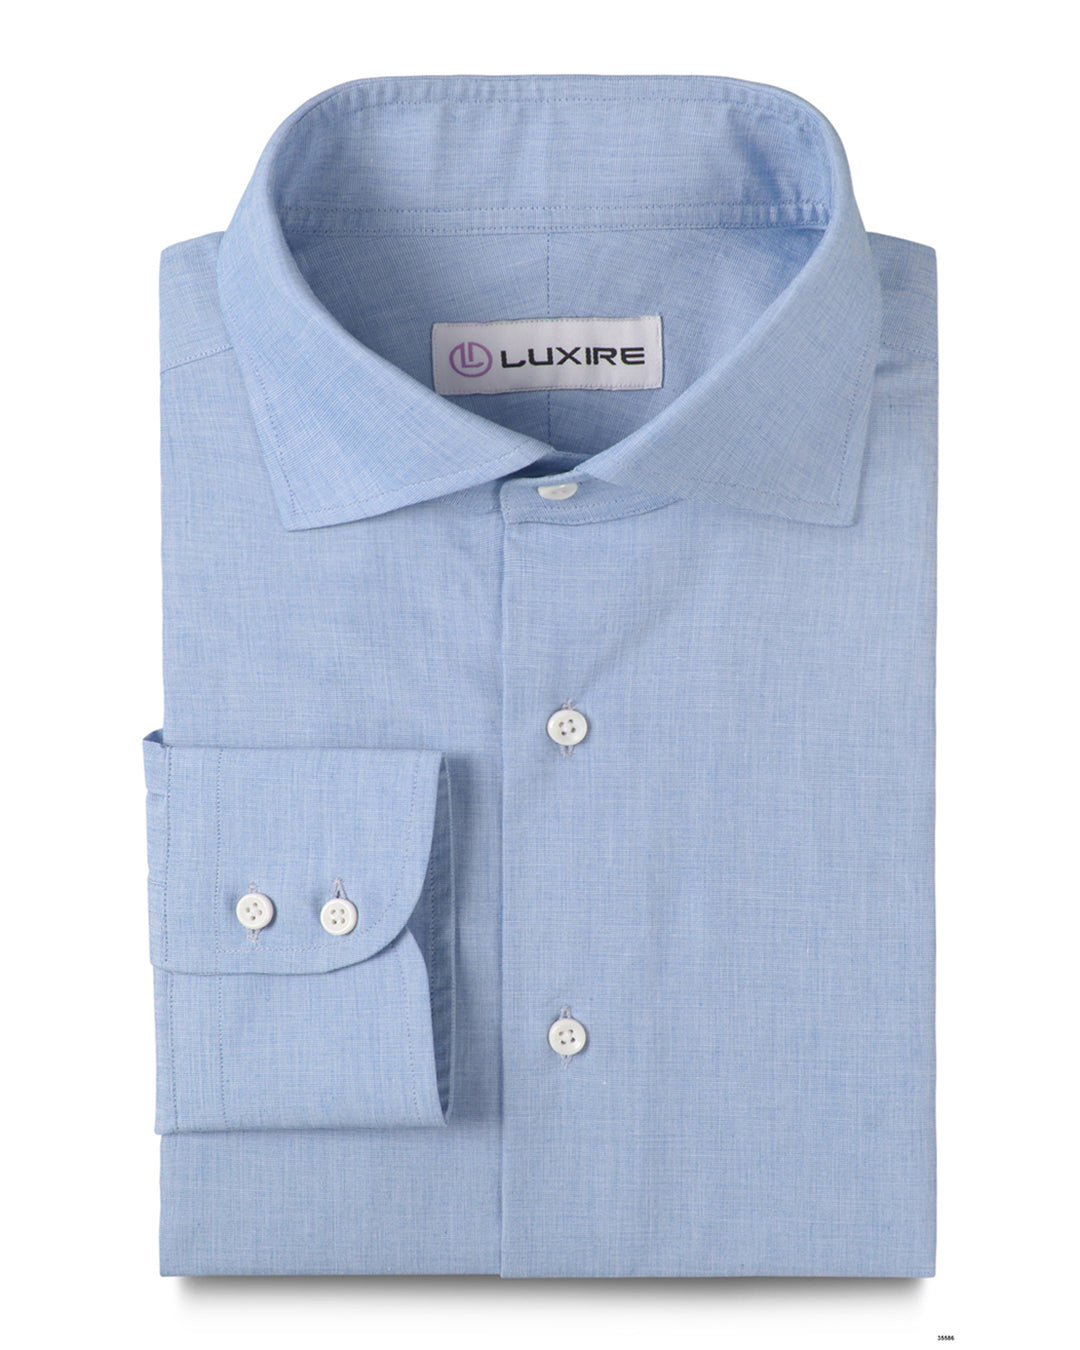 Everyday Shirt: Pale Blue End-on-End